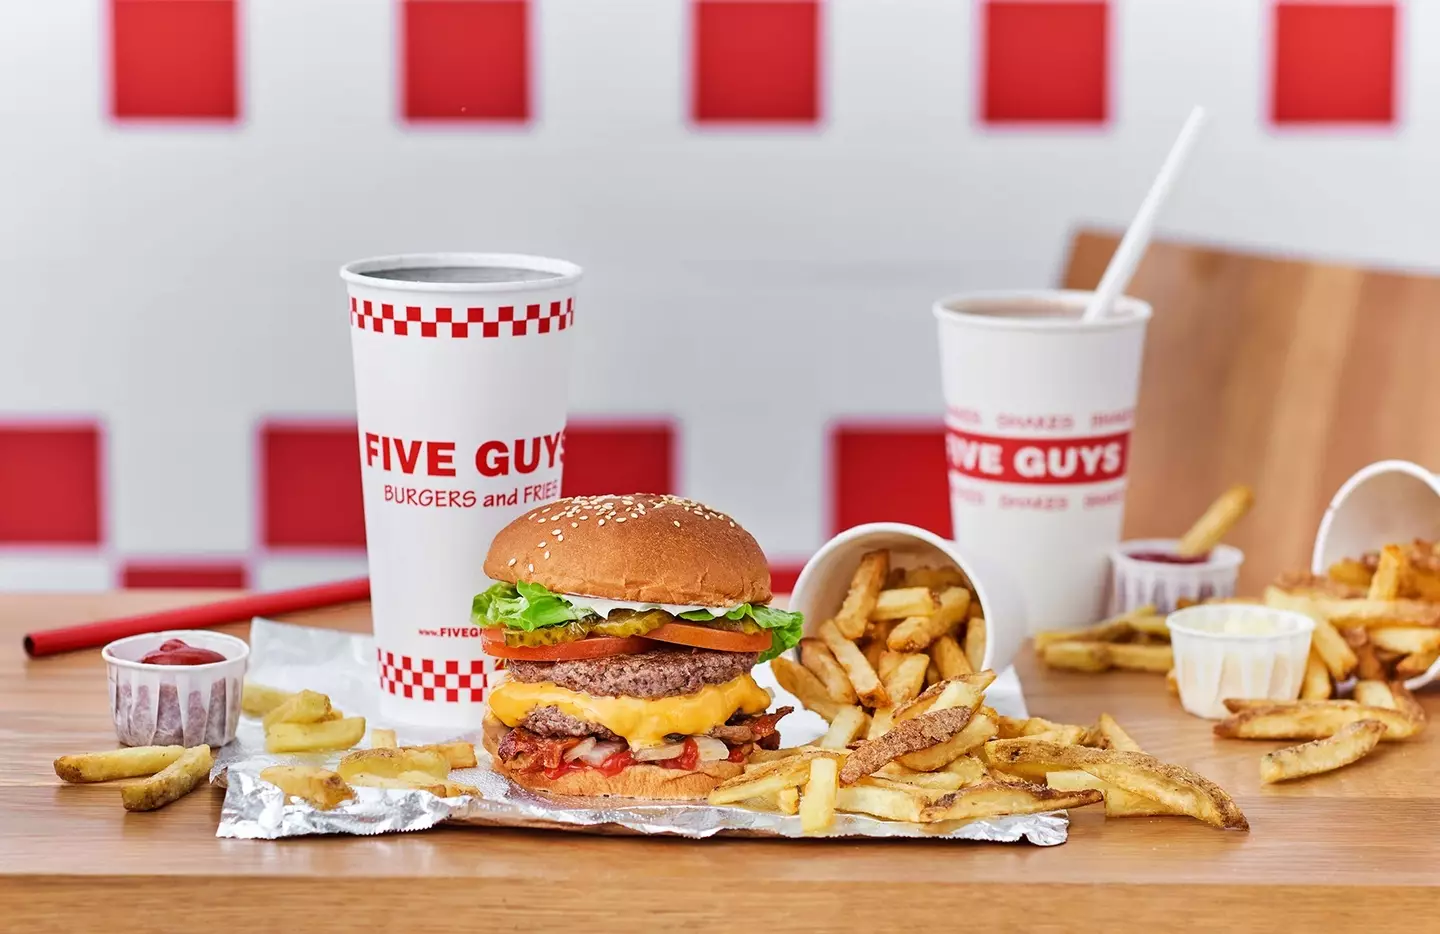 A feast at Five Guys will set you back a few quid.